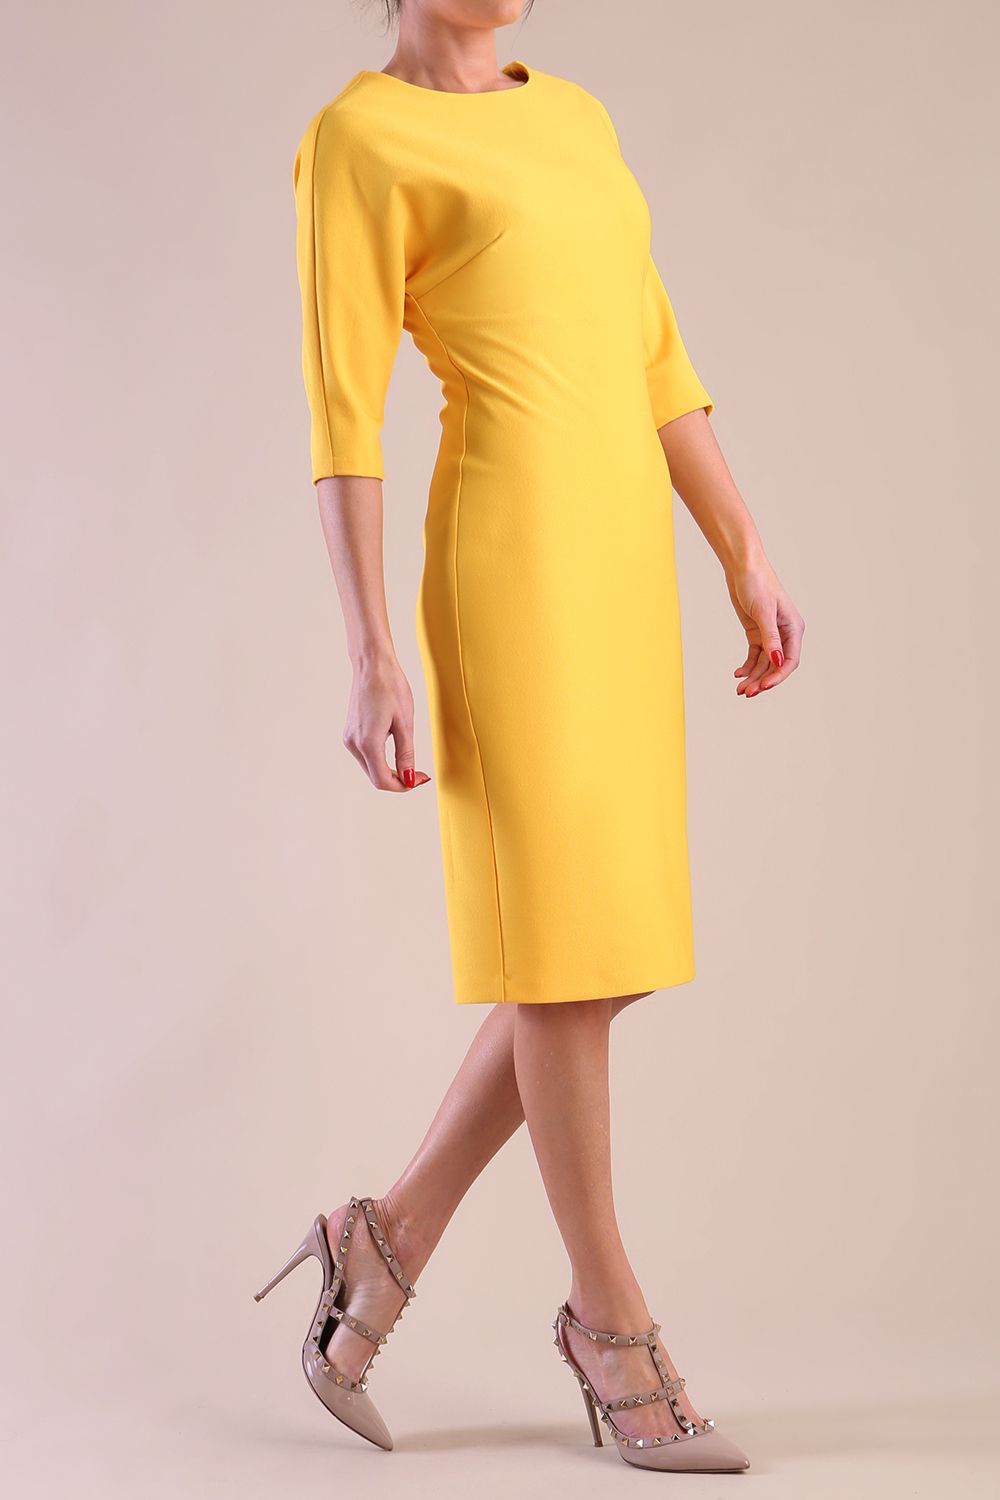 Model wearing diva catwalk Fulham 3/4 Sleeved pencil skirt dress with round neck in Daffodil Yellow